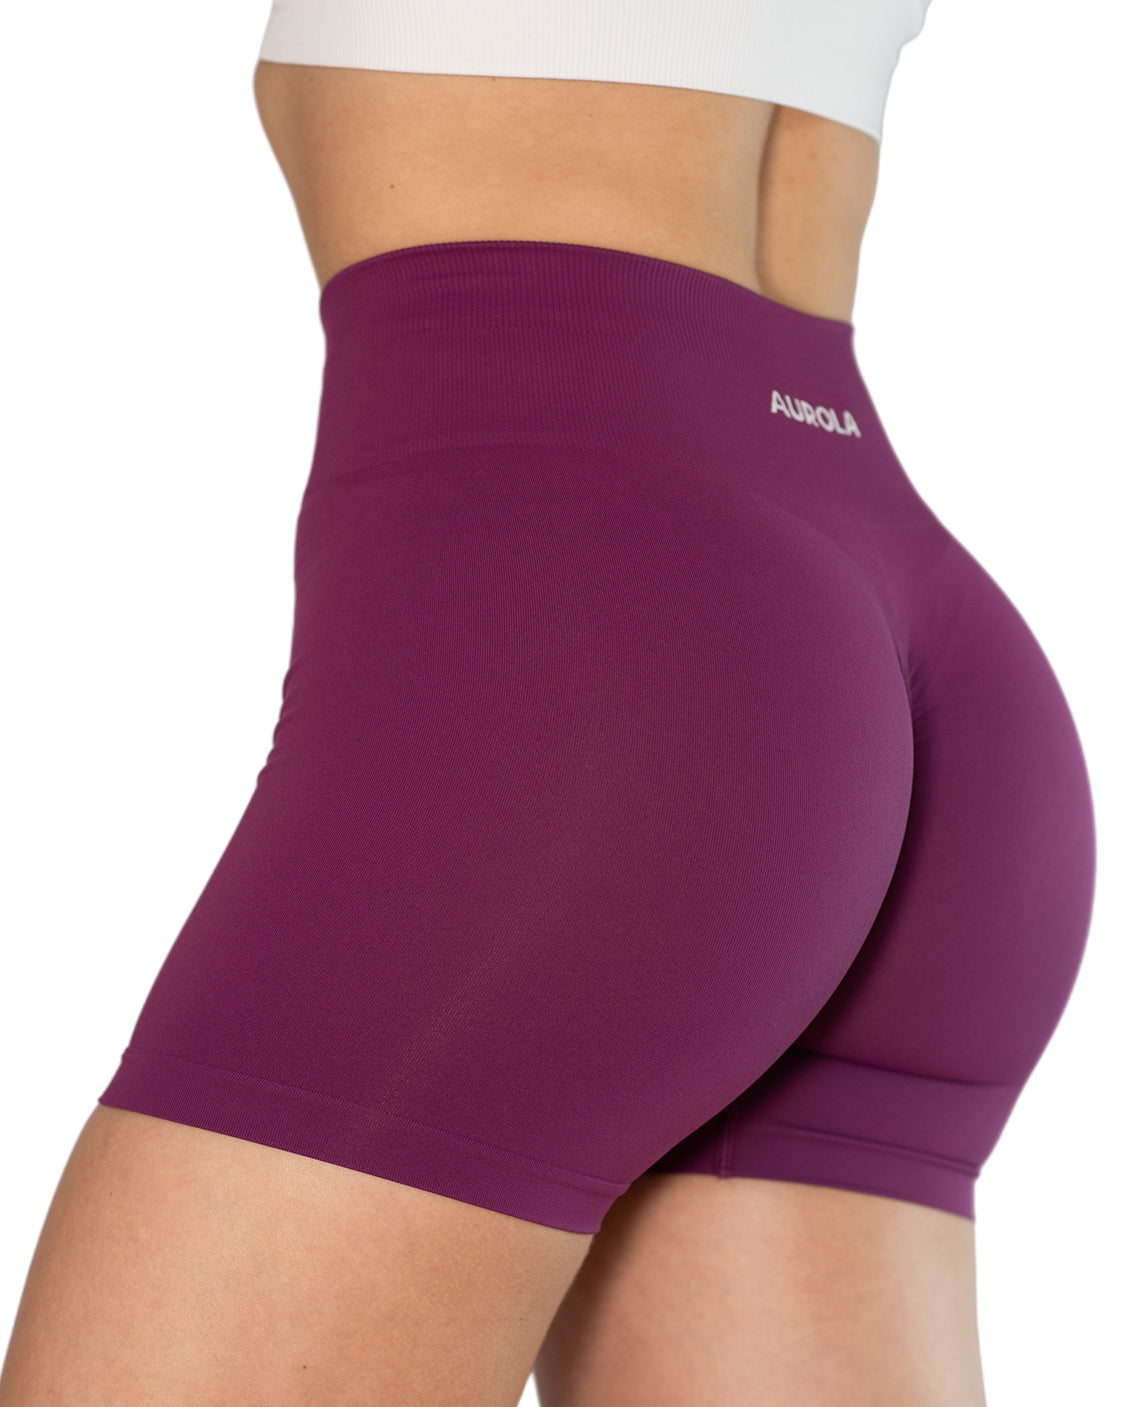 AUROLA Dream Collection Workout Shorts for Women High Waist Seamless  Scrunch Athletic Running Gym Yoga Active Shorts Black. Size: S 32.99 -  Quarter Price